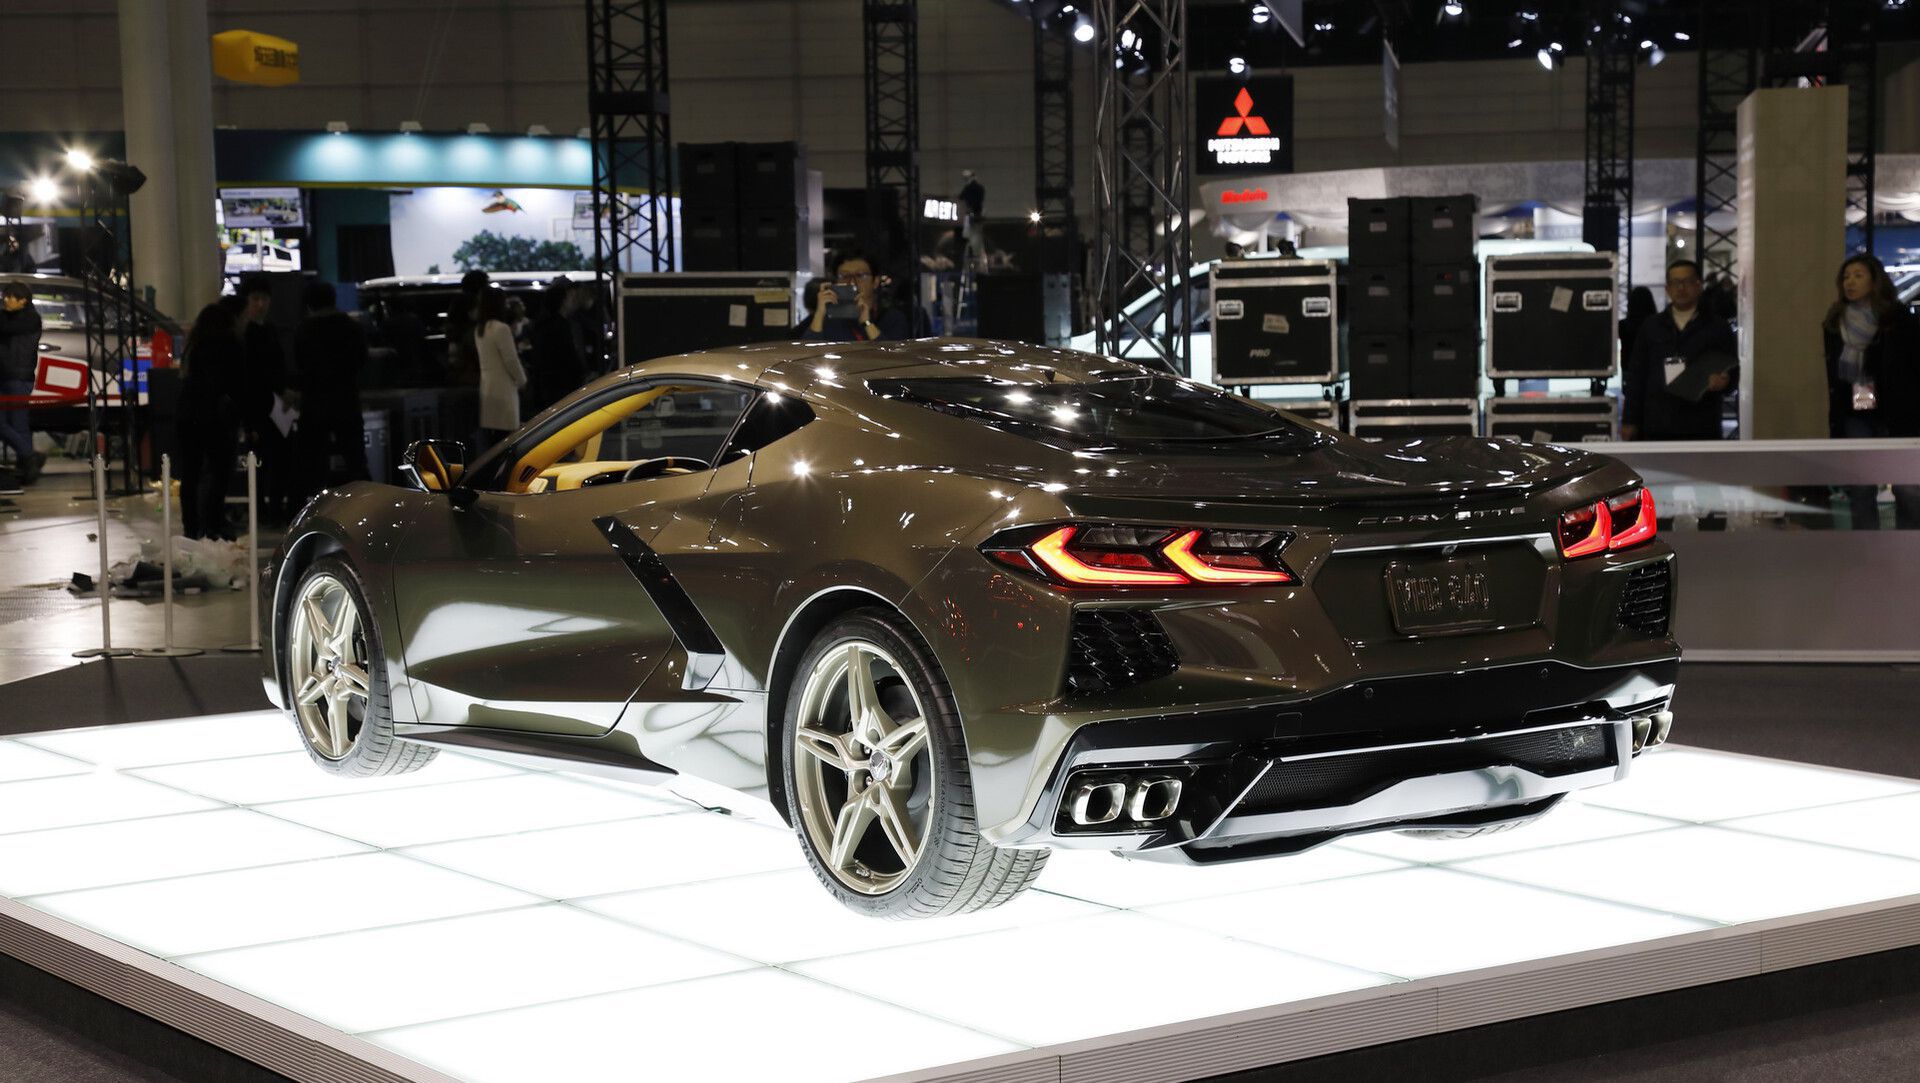 What Do You Think Of The 2020 Corvette C8 In Zeus Bronze? 